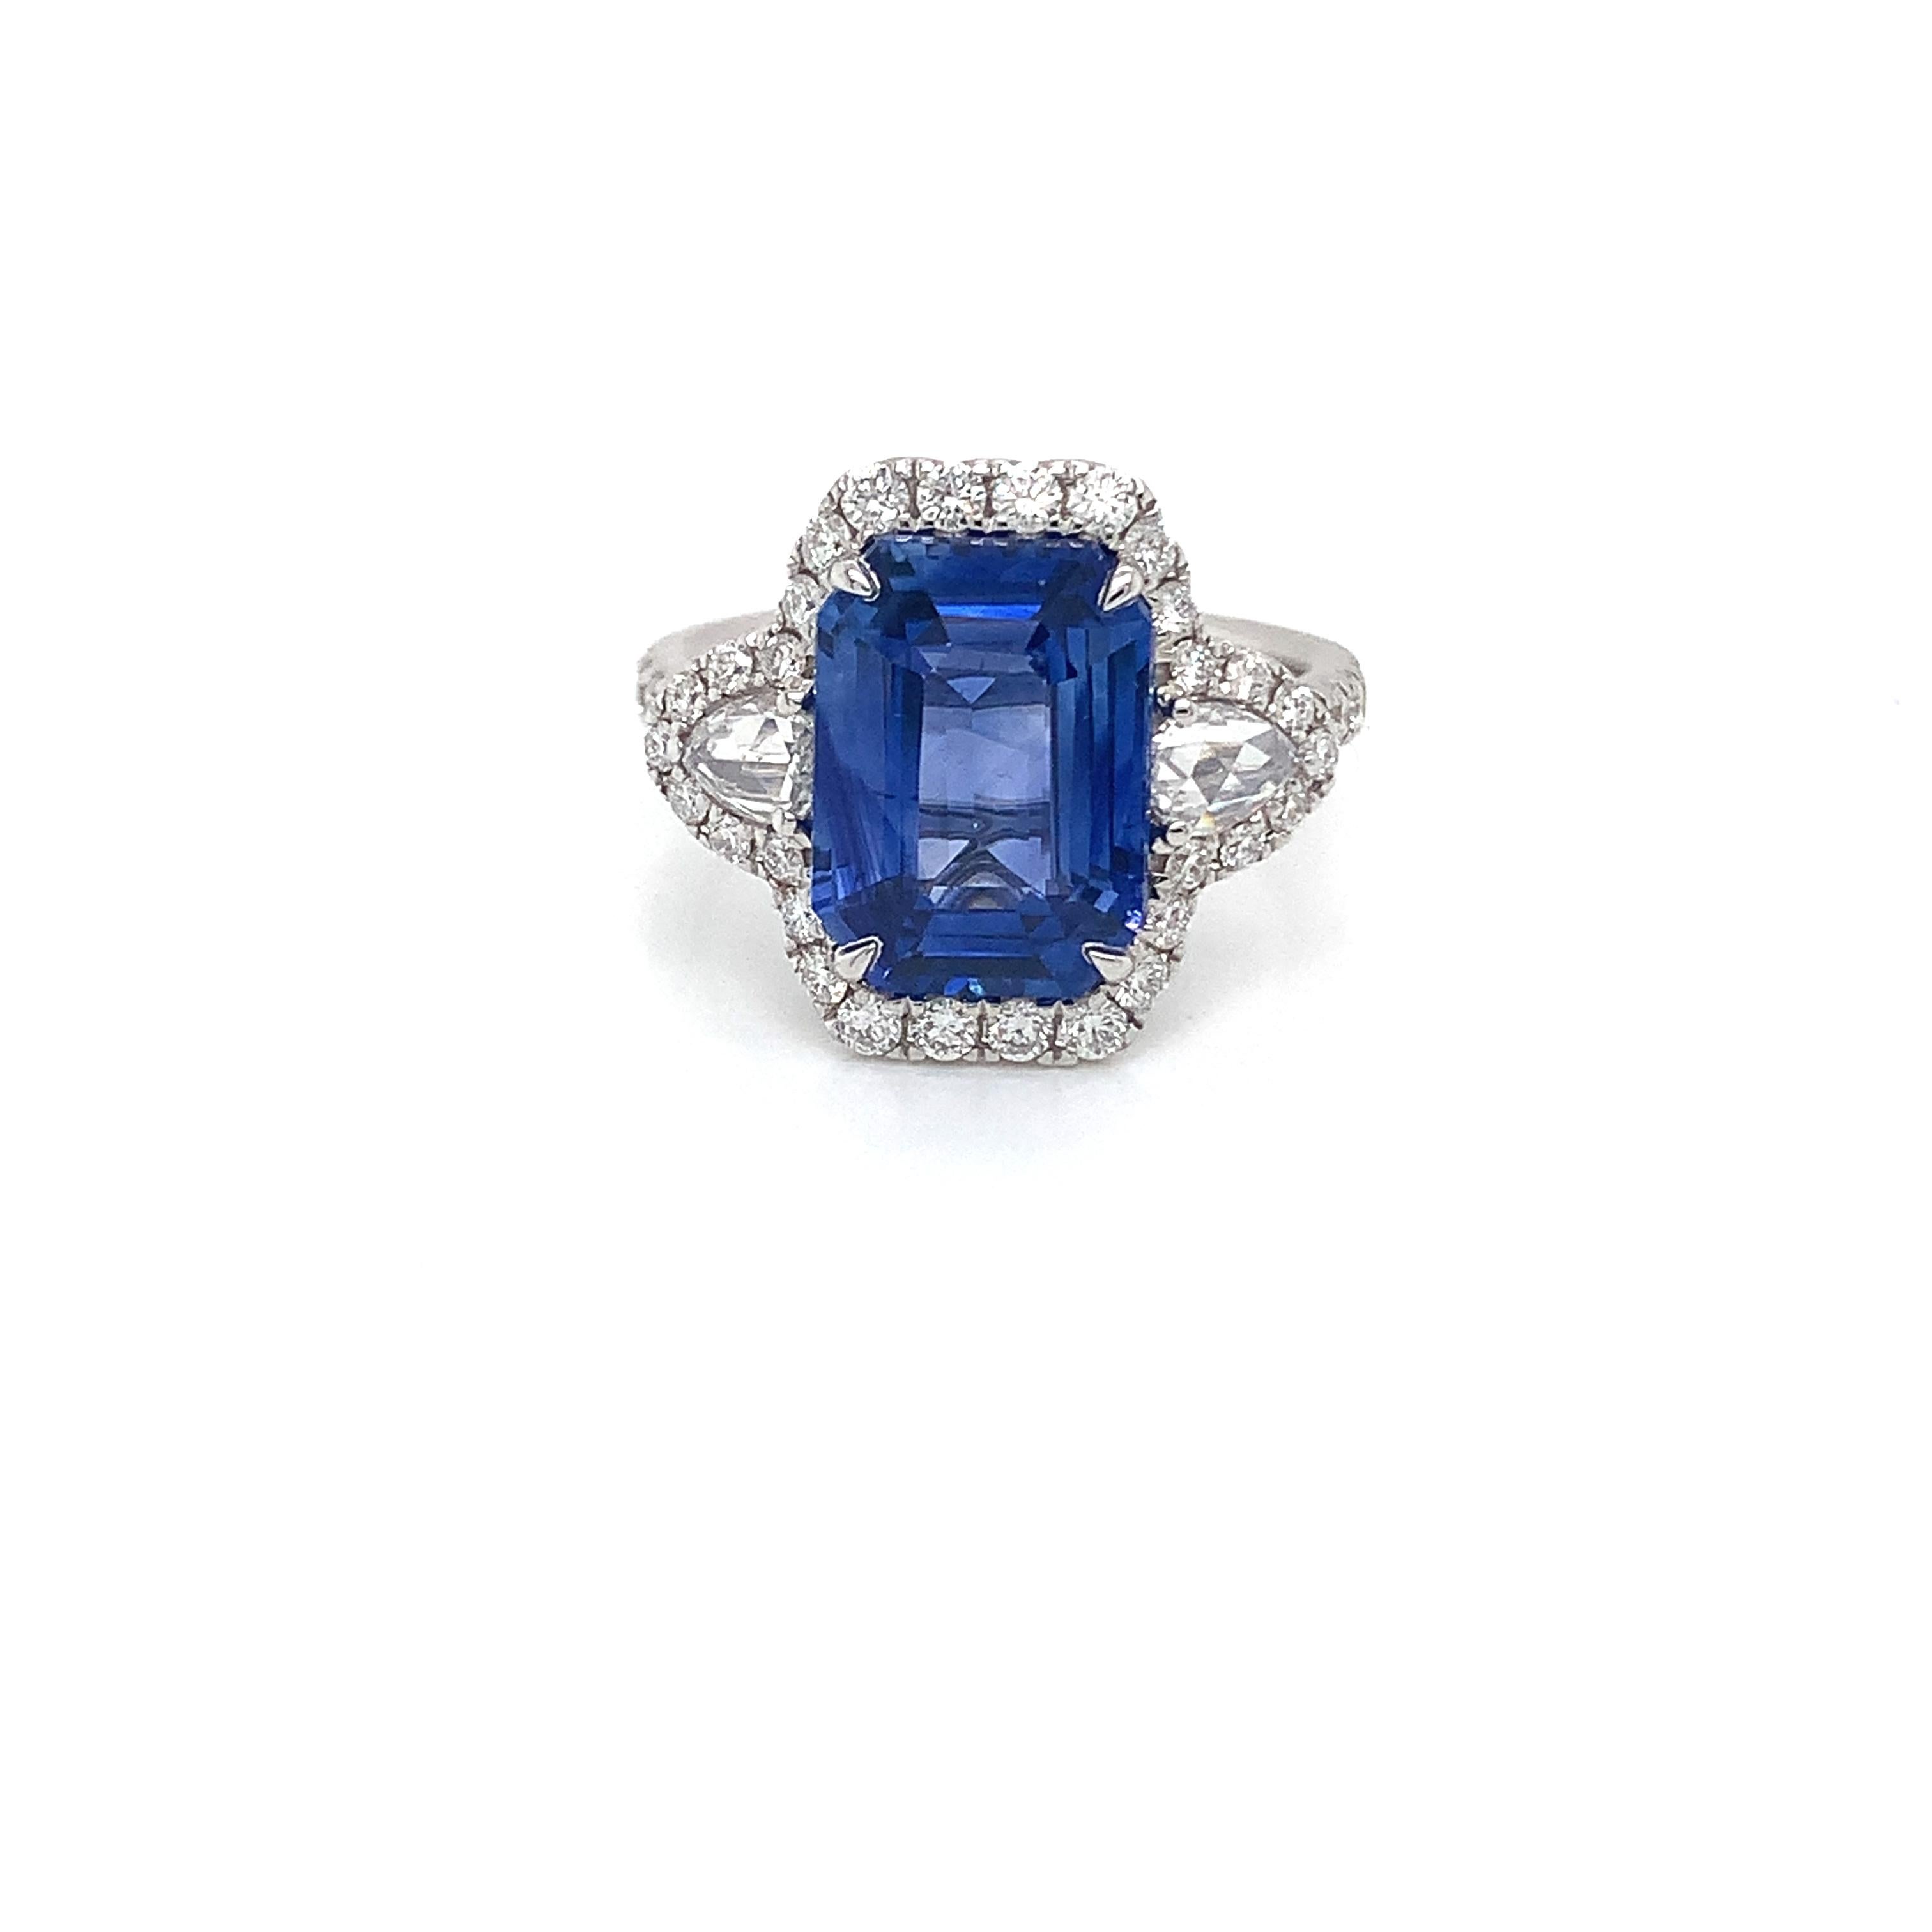 GIA Certified Ceylon sapphire weighing 5.50 cts
Measuring (11.86x8.68x5.12) mm
2 rose cut diamonds weighing .36 cts
42 round diamonds weighing .64 cts
Set in 18k white gold ring